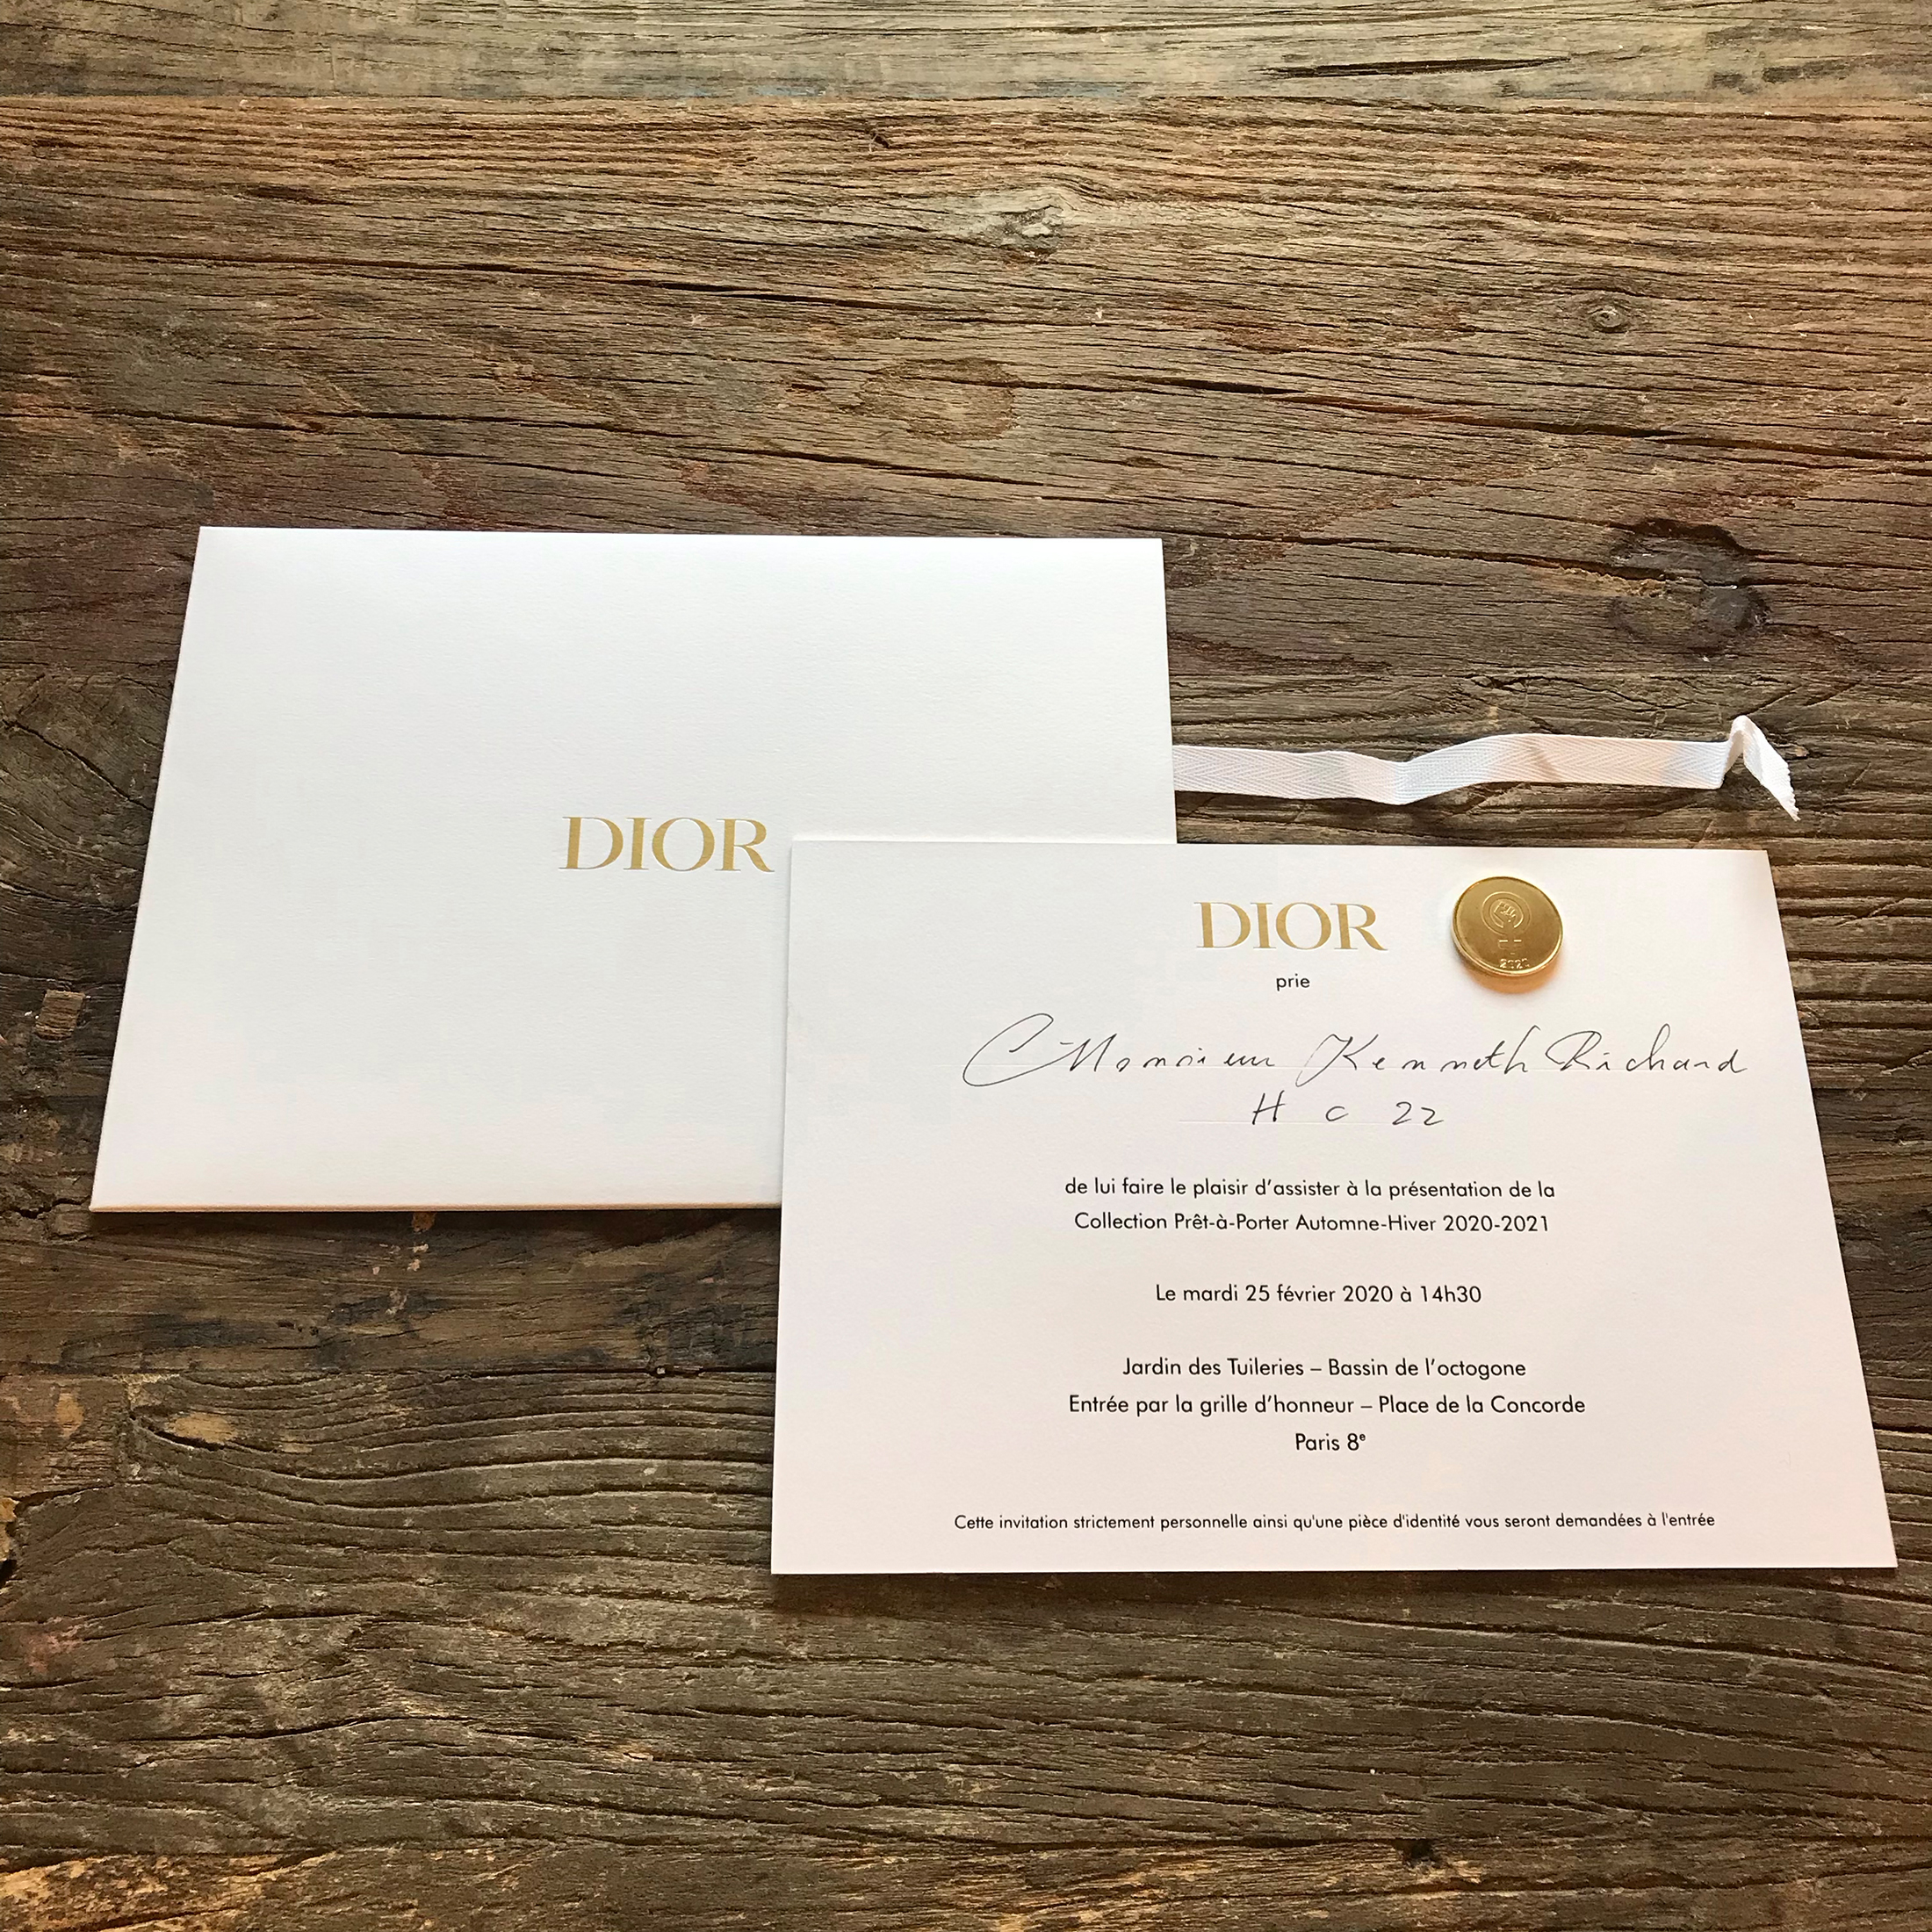 The Best Women's Fall 2020 Fashion Show Invitations